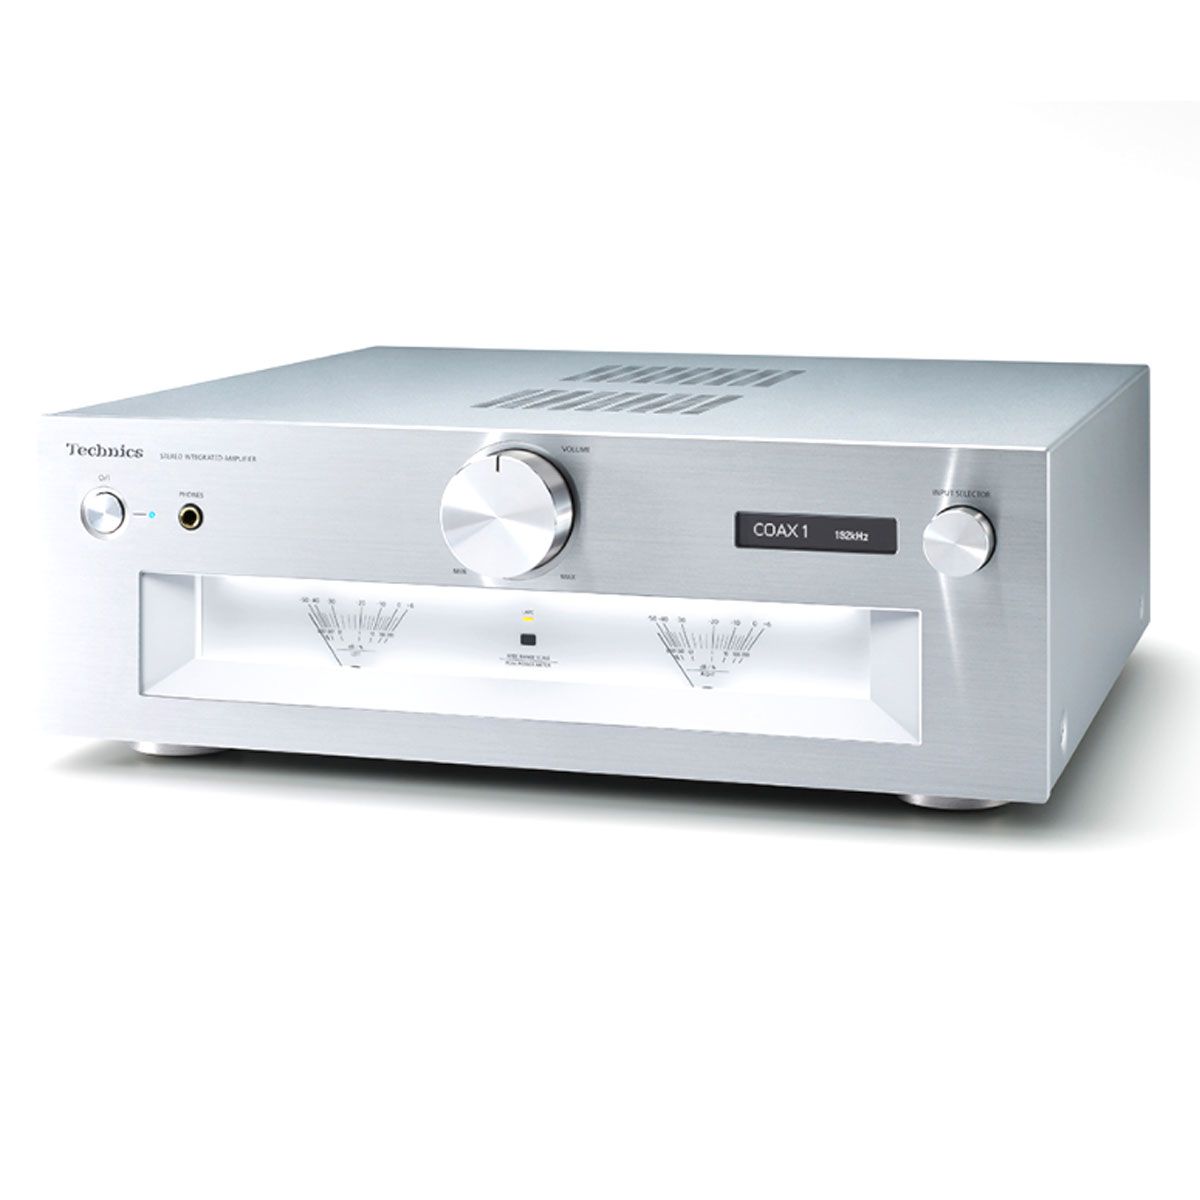 Technics SU-G700M2 Integrated Amplifier, Silver, front angle view